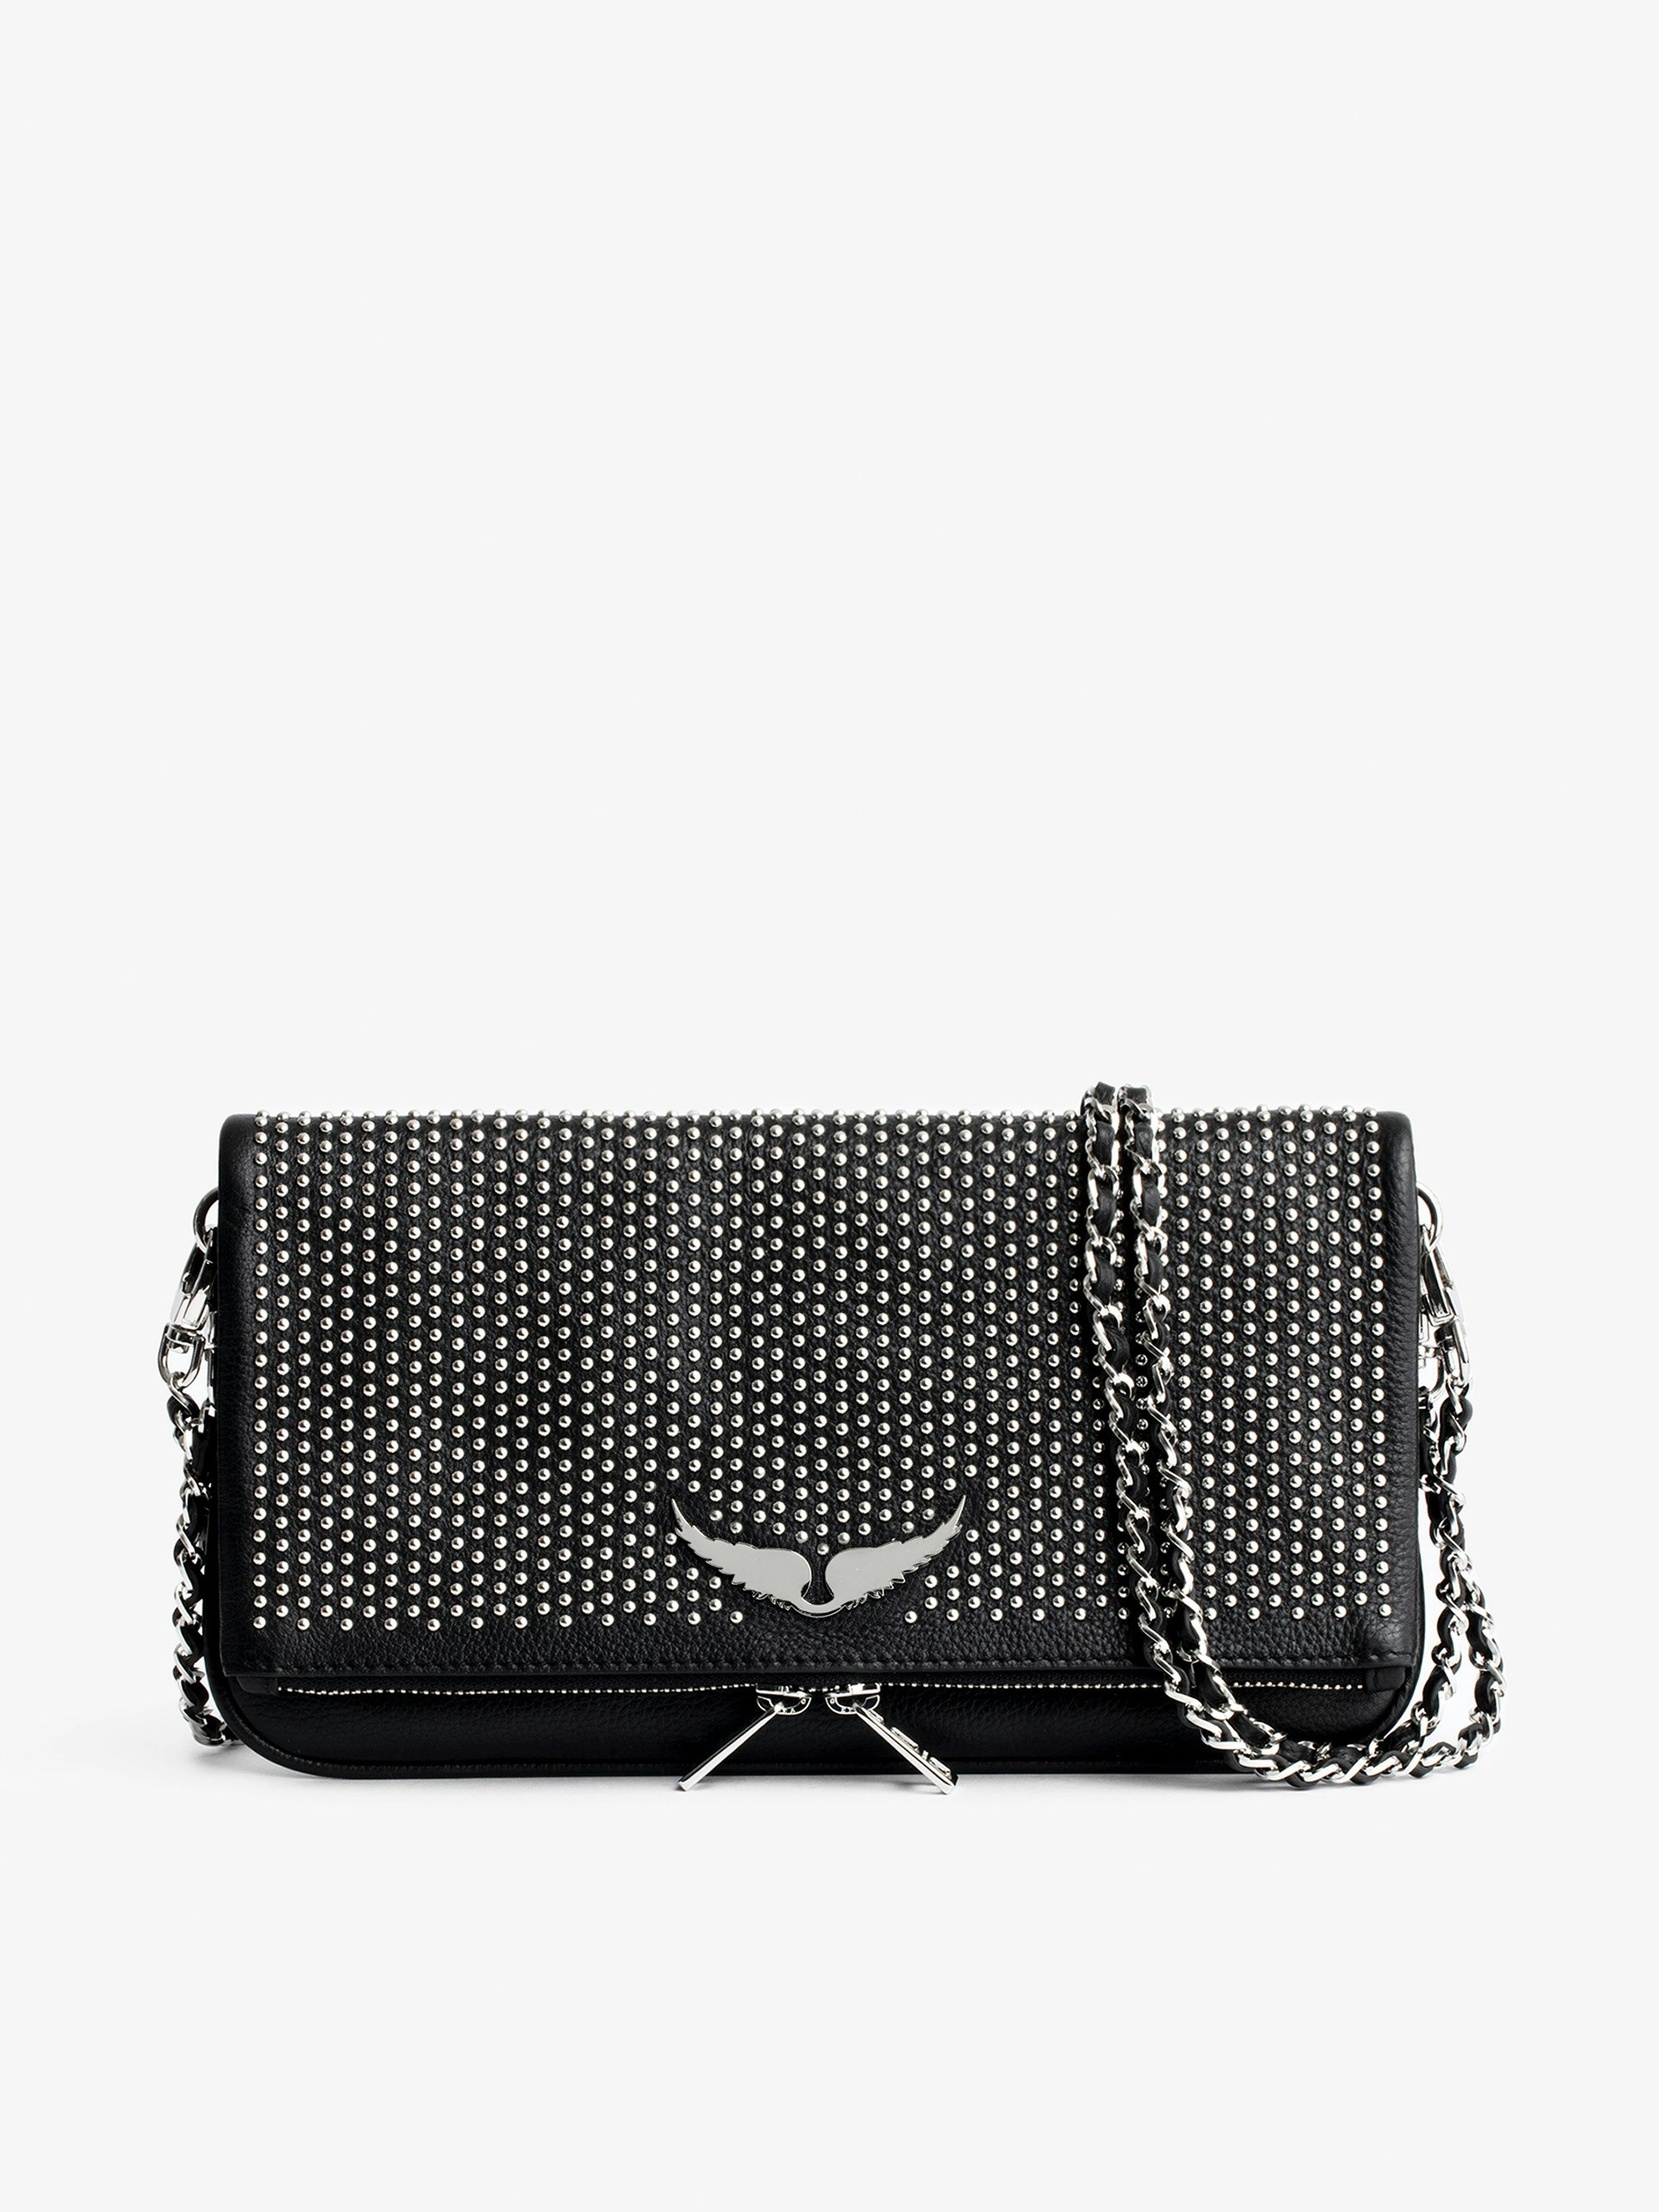 Rock Dotted Swiss Clutch - Women’s black grained leather clutch with dotted Swiss studs and a double leather and metal chain strap.